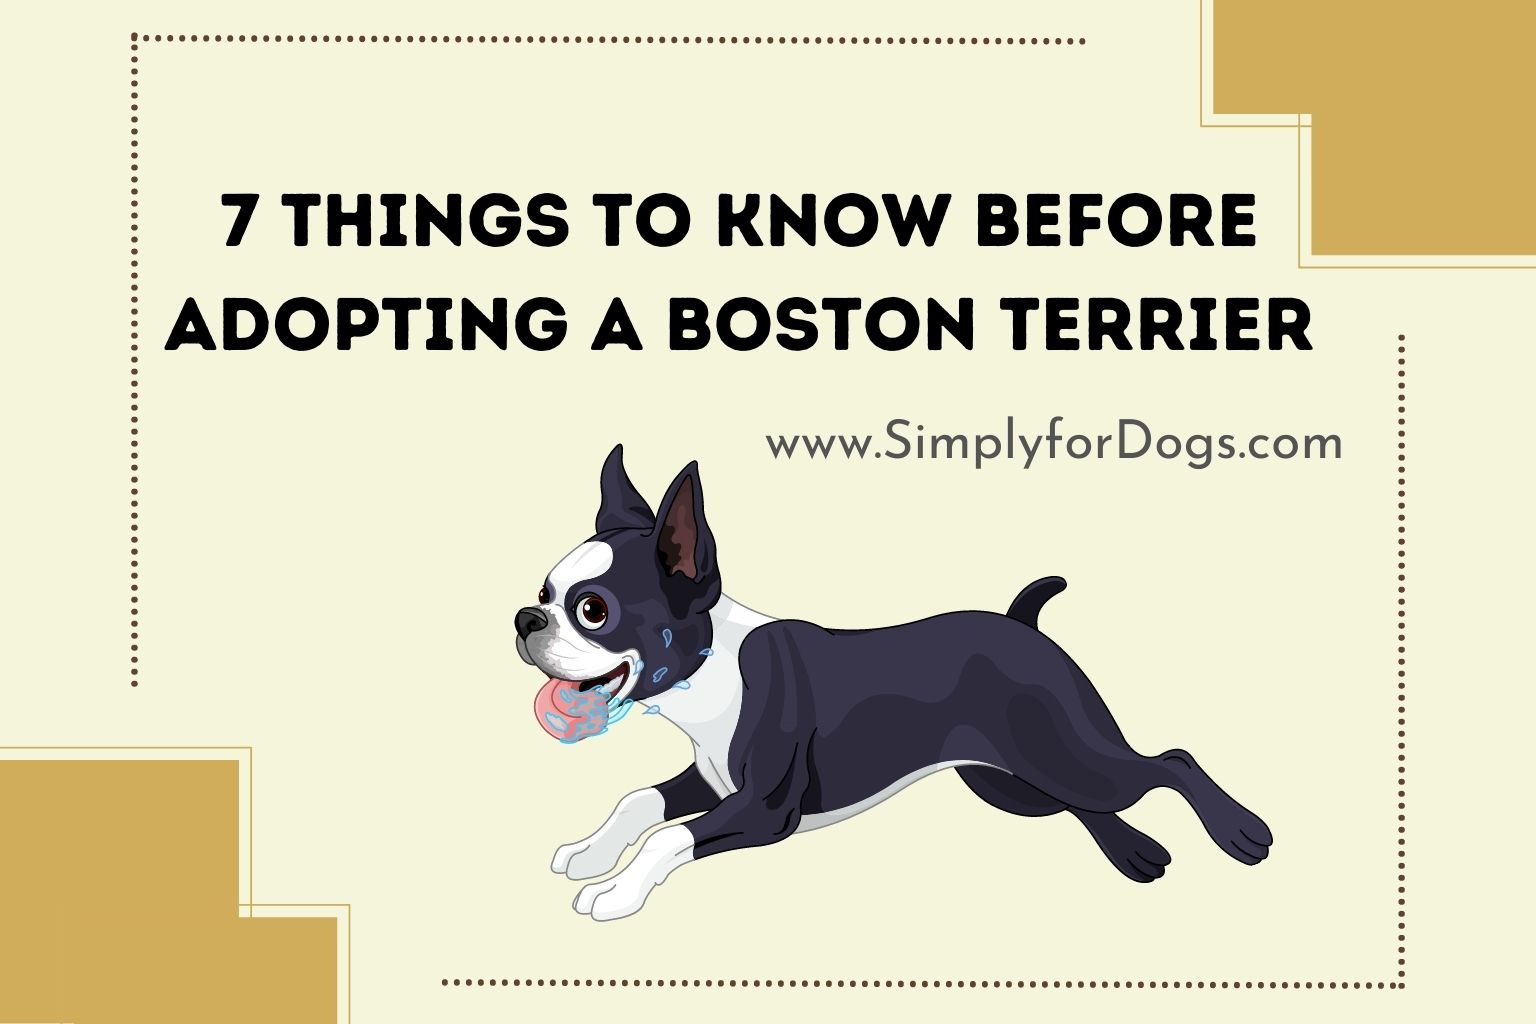 7 Things to Know Before Adopting a Boston Terrier